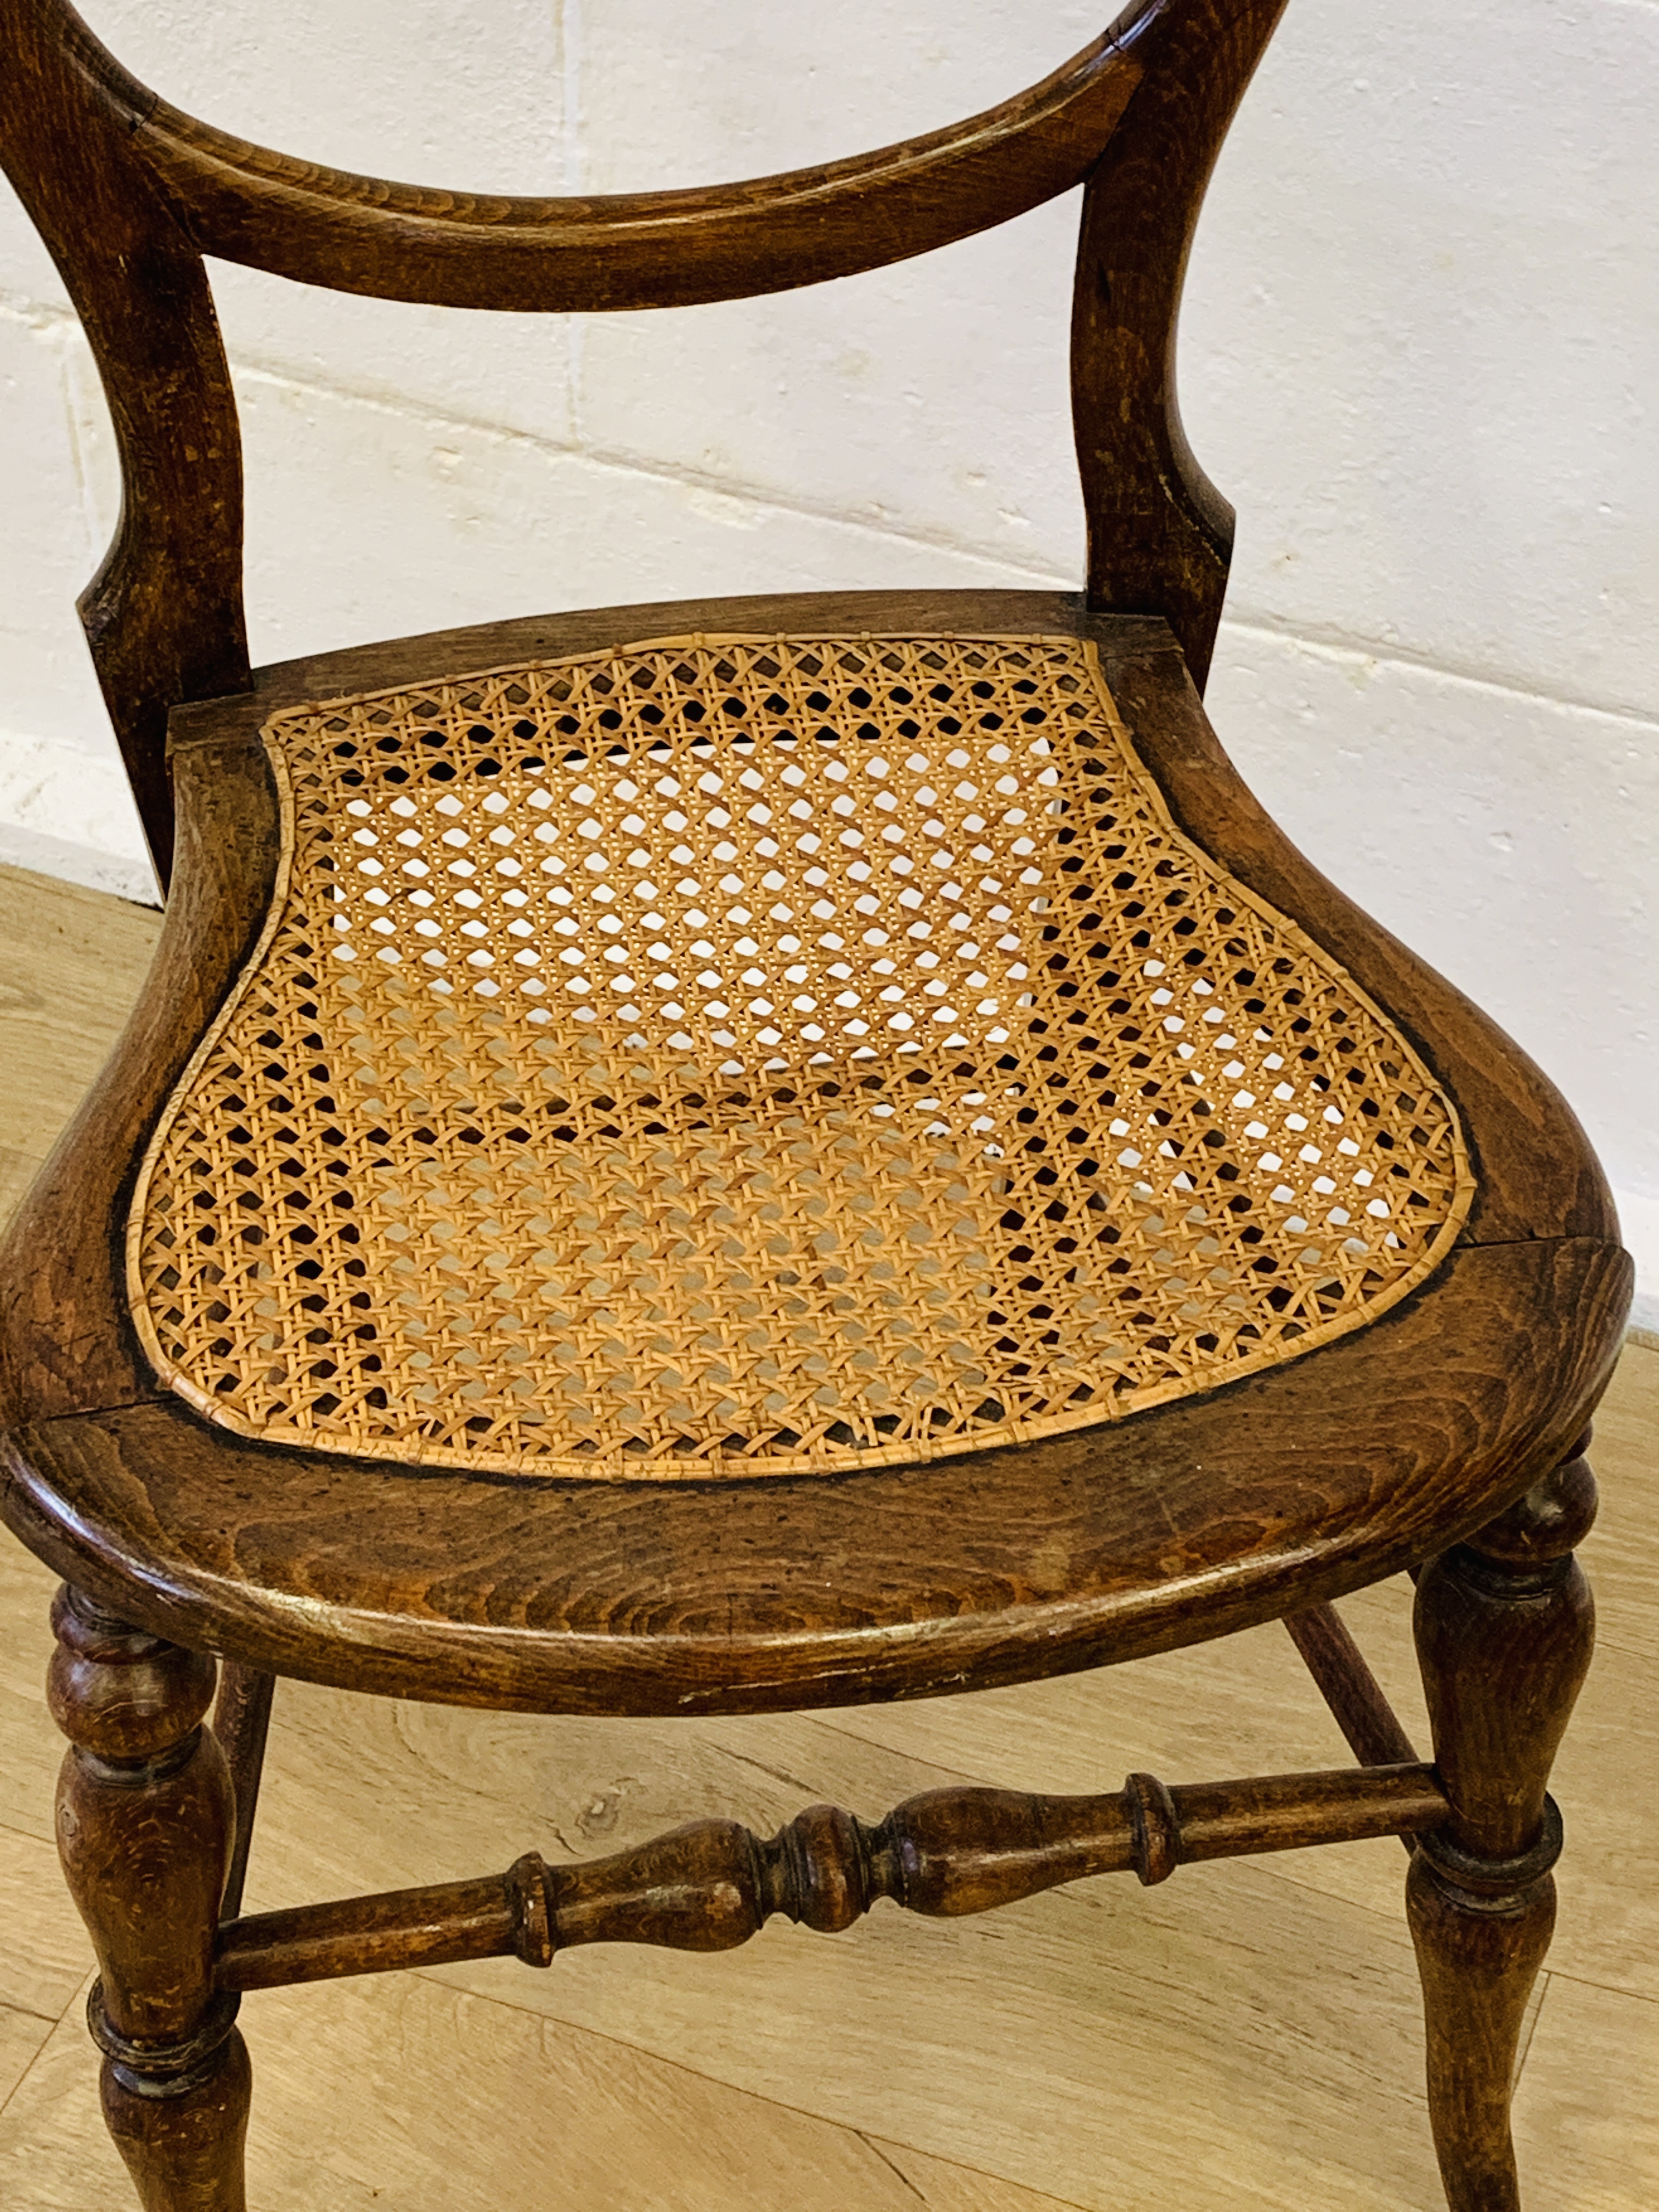 Mahogany balloon back dining chair with cane seat - Image 4 of 4